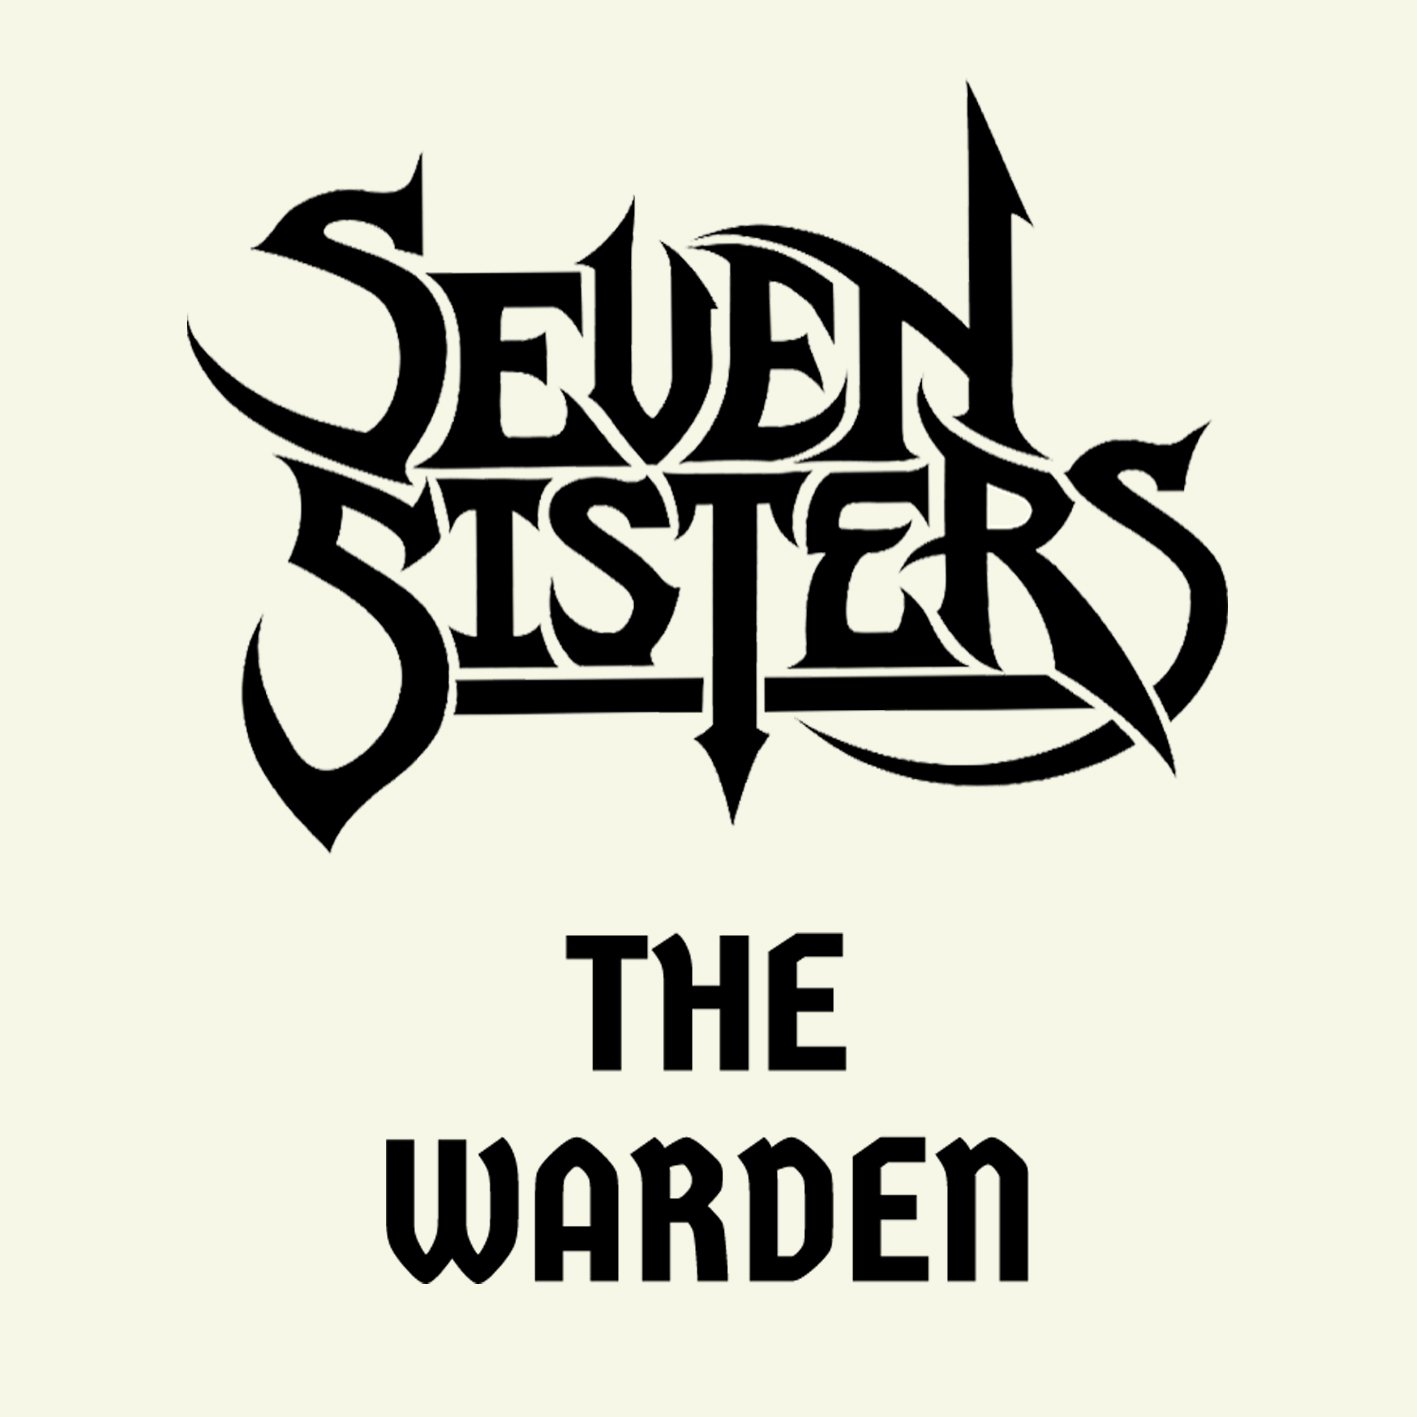 Sisters the last day. Seven sisters Band. Sisterly last читать. Seven sisters Clubs. Seven sisters uk Live at Brofest.